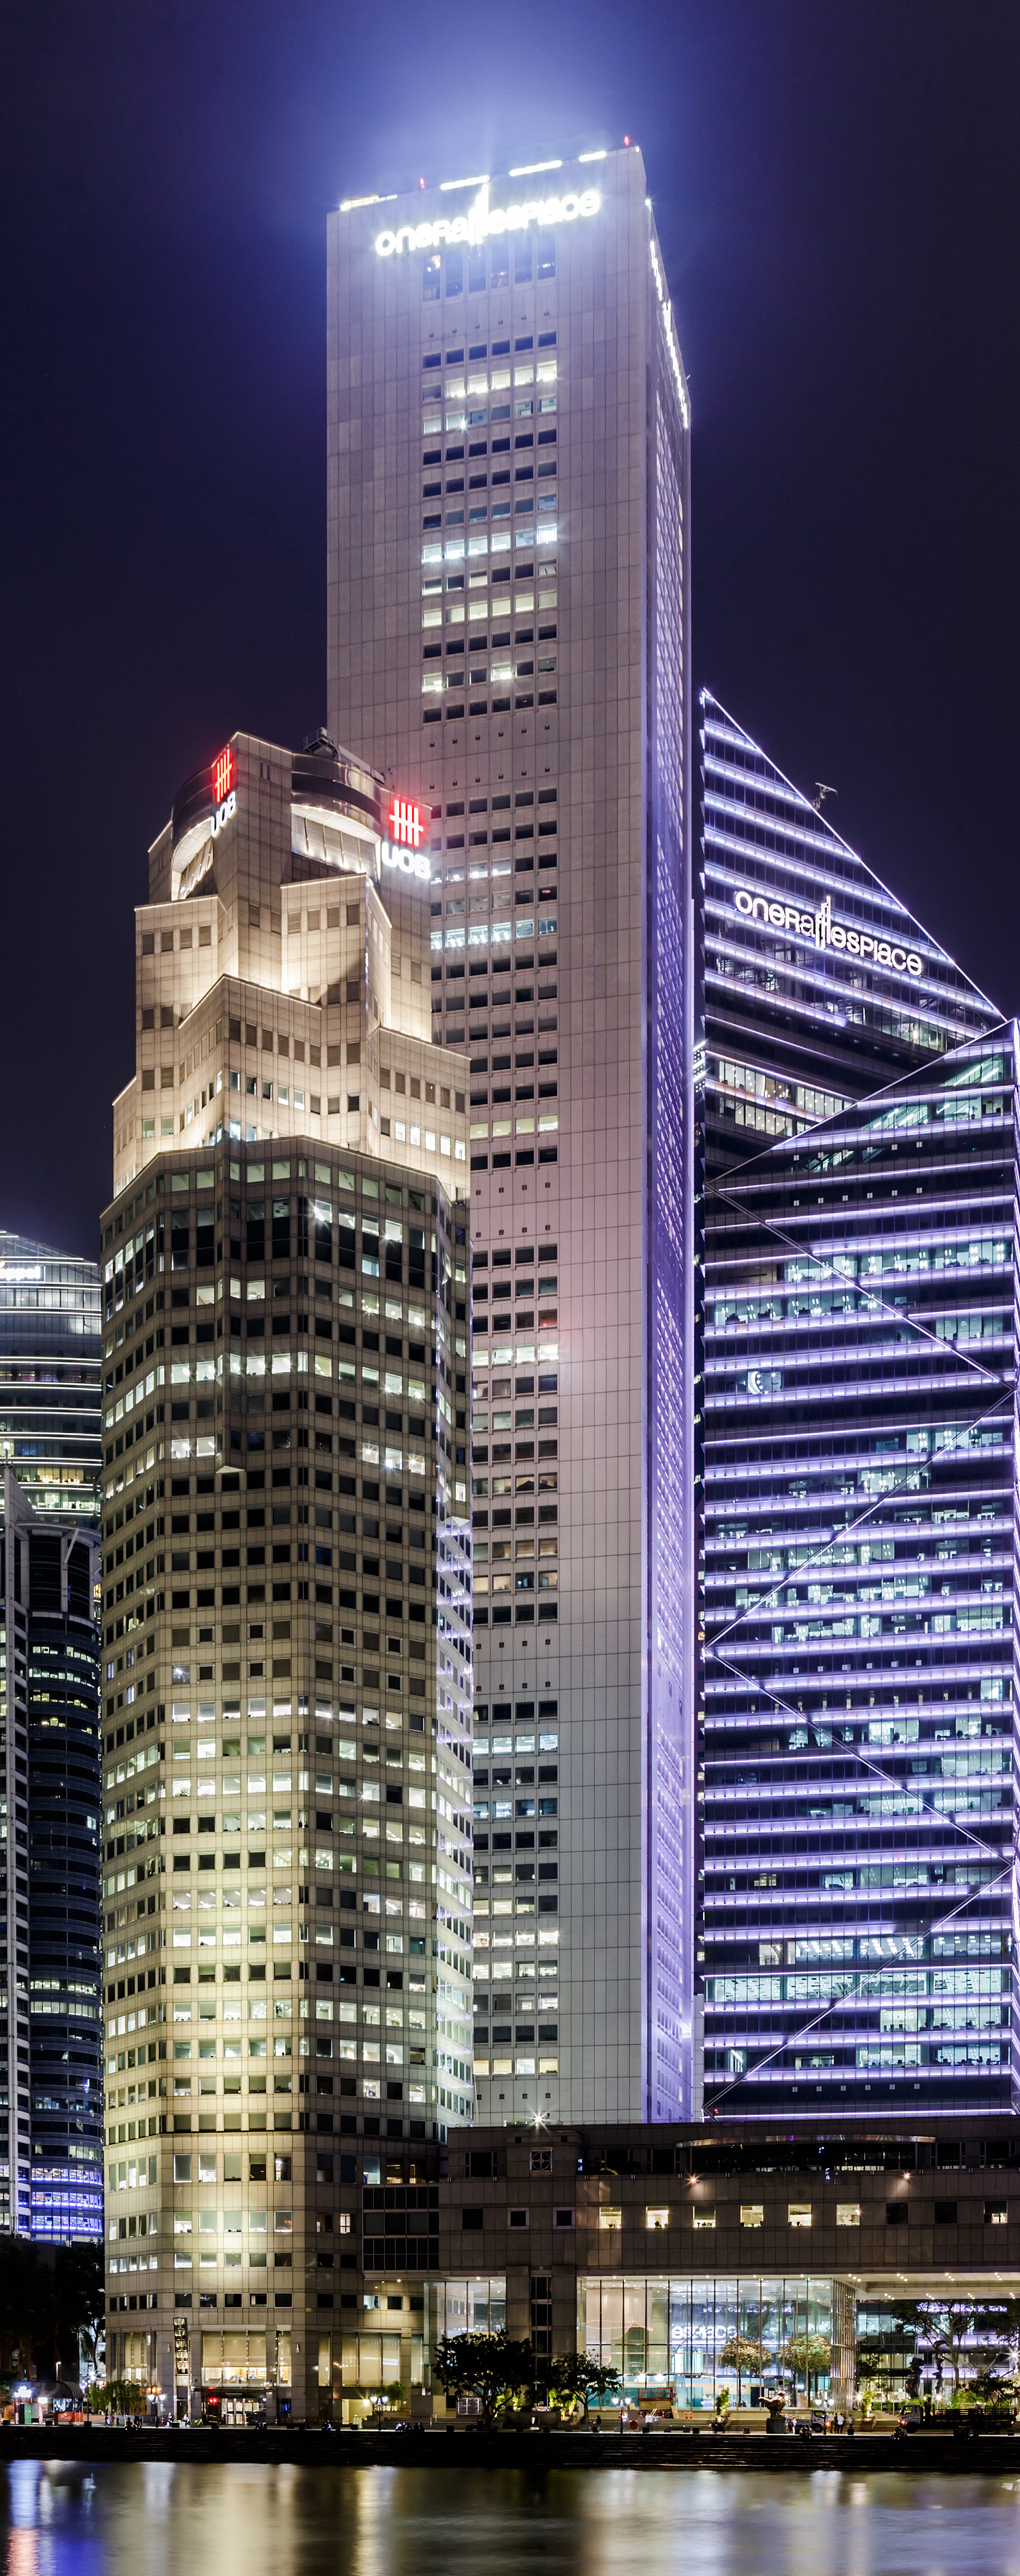 Overseas Union Bank Centre, Singapore - View from the north. © Mathias Beinling